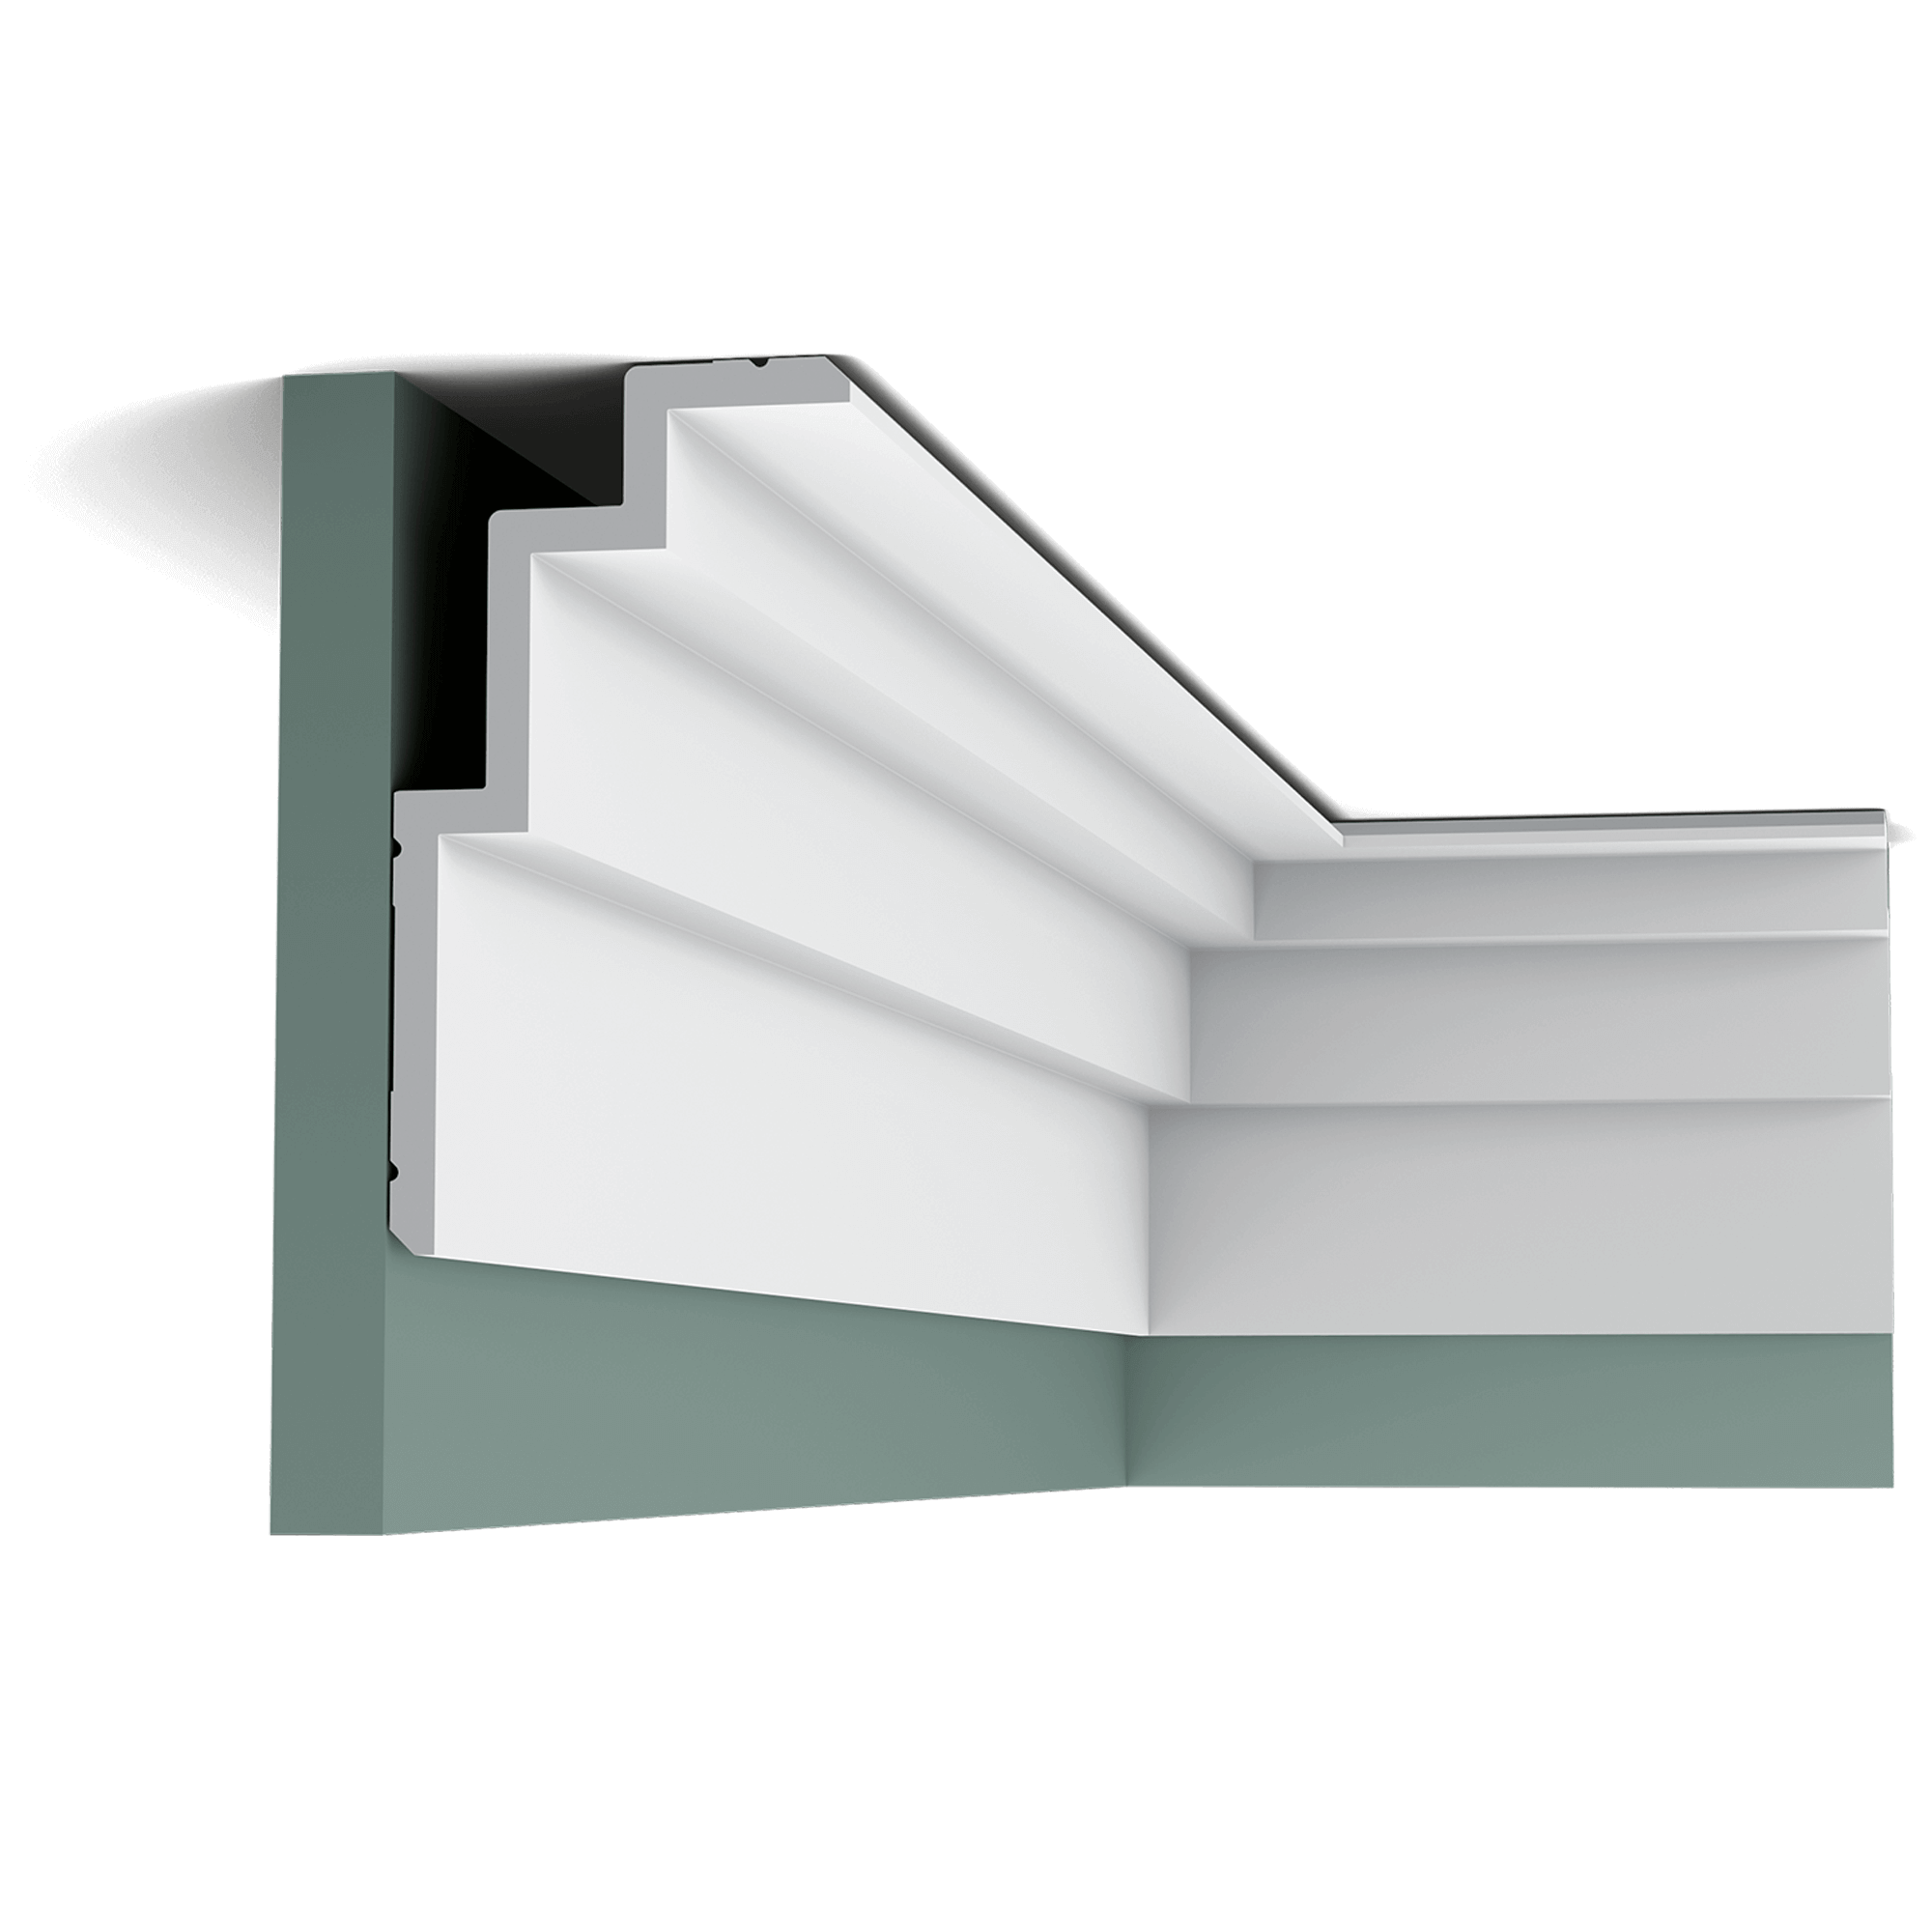 c392 border fde0 A clean, modern profile from the Steps range. The angled corners above and below provide additional subtle shadow lines. Designed by Orio Tonini.